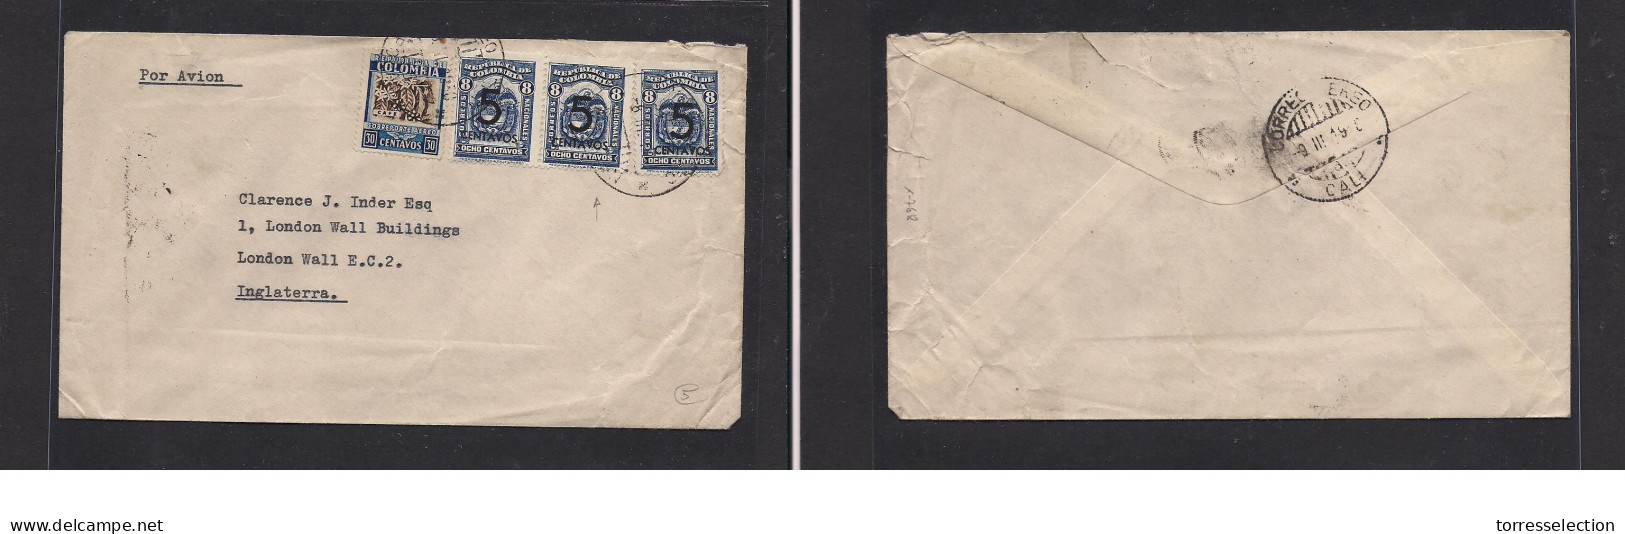 COLOMBIA. Colombia - Cover -  1938 Cali To UK Air Ovpt Mult Fkd Env. Easy Deal. XSALE. - Colombia